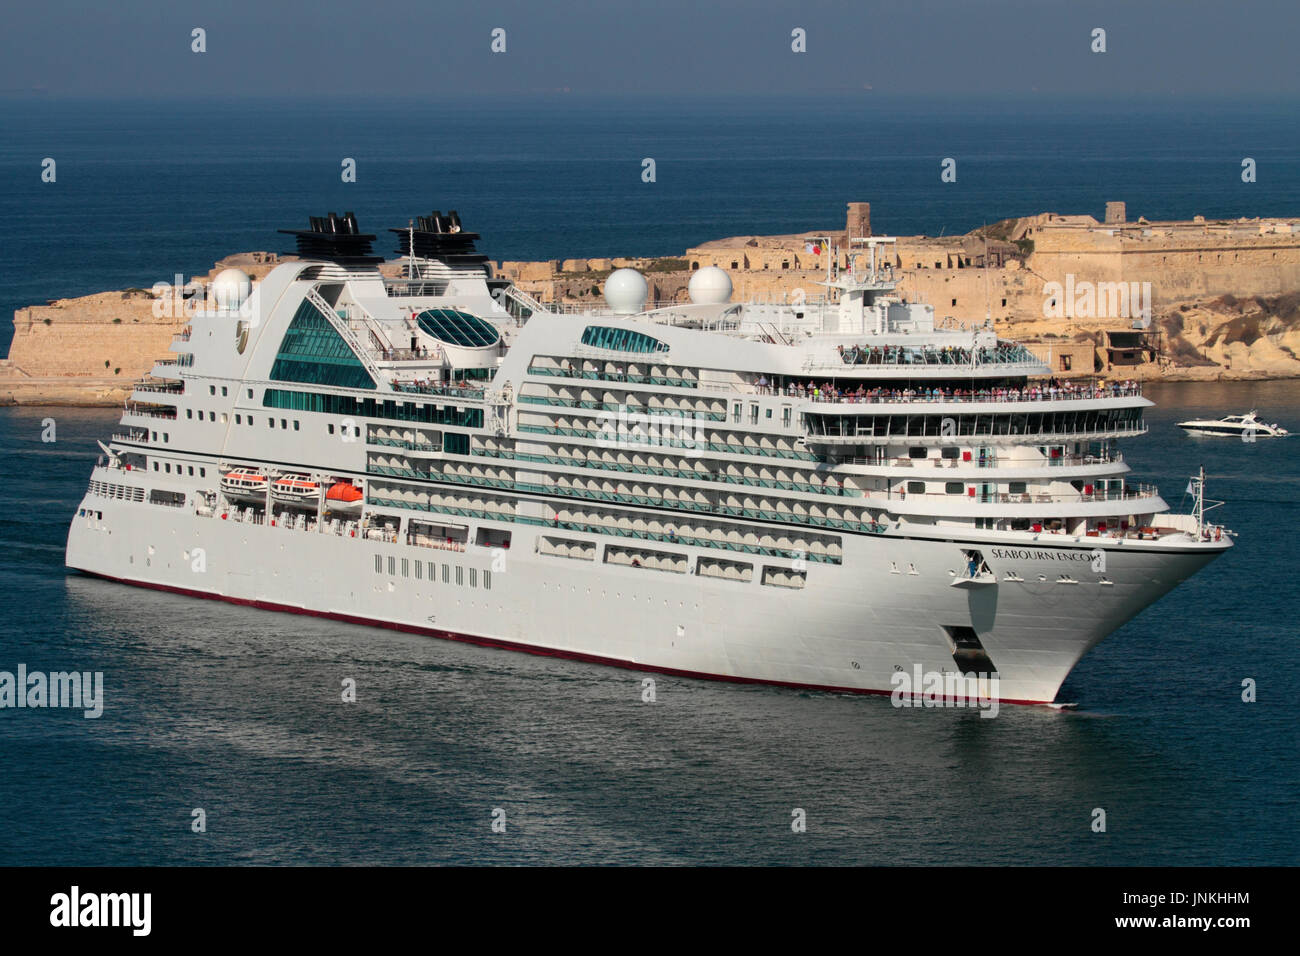 Mediterranean travel. The modern cruise ship or liner Seabourn Encore entering Malta's Grand Harbour, with Fort Ricasoli visible in the background Stock Photo